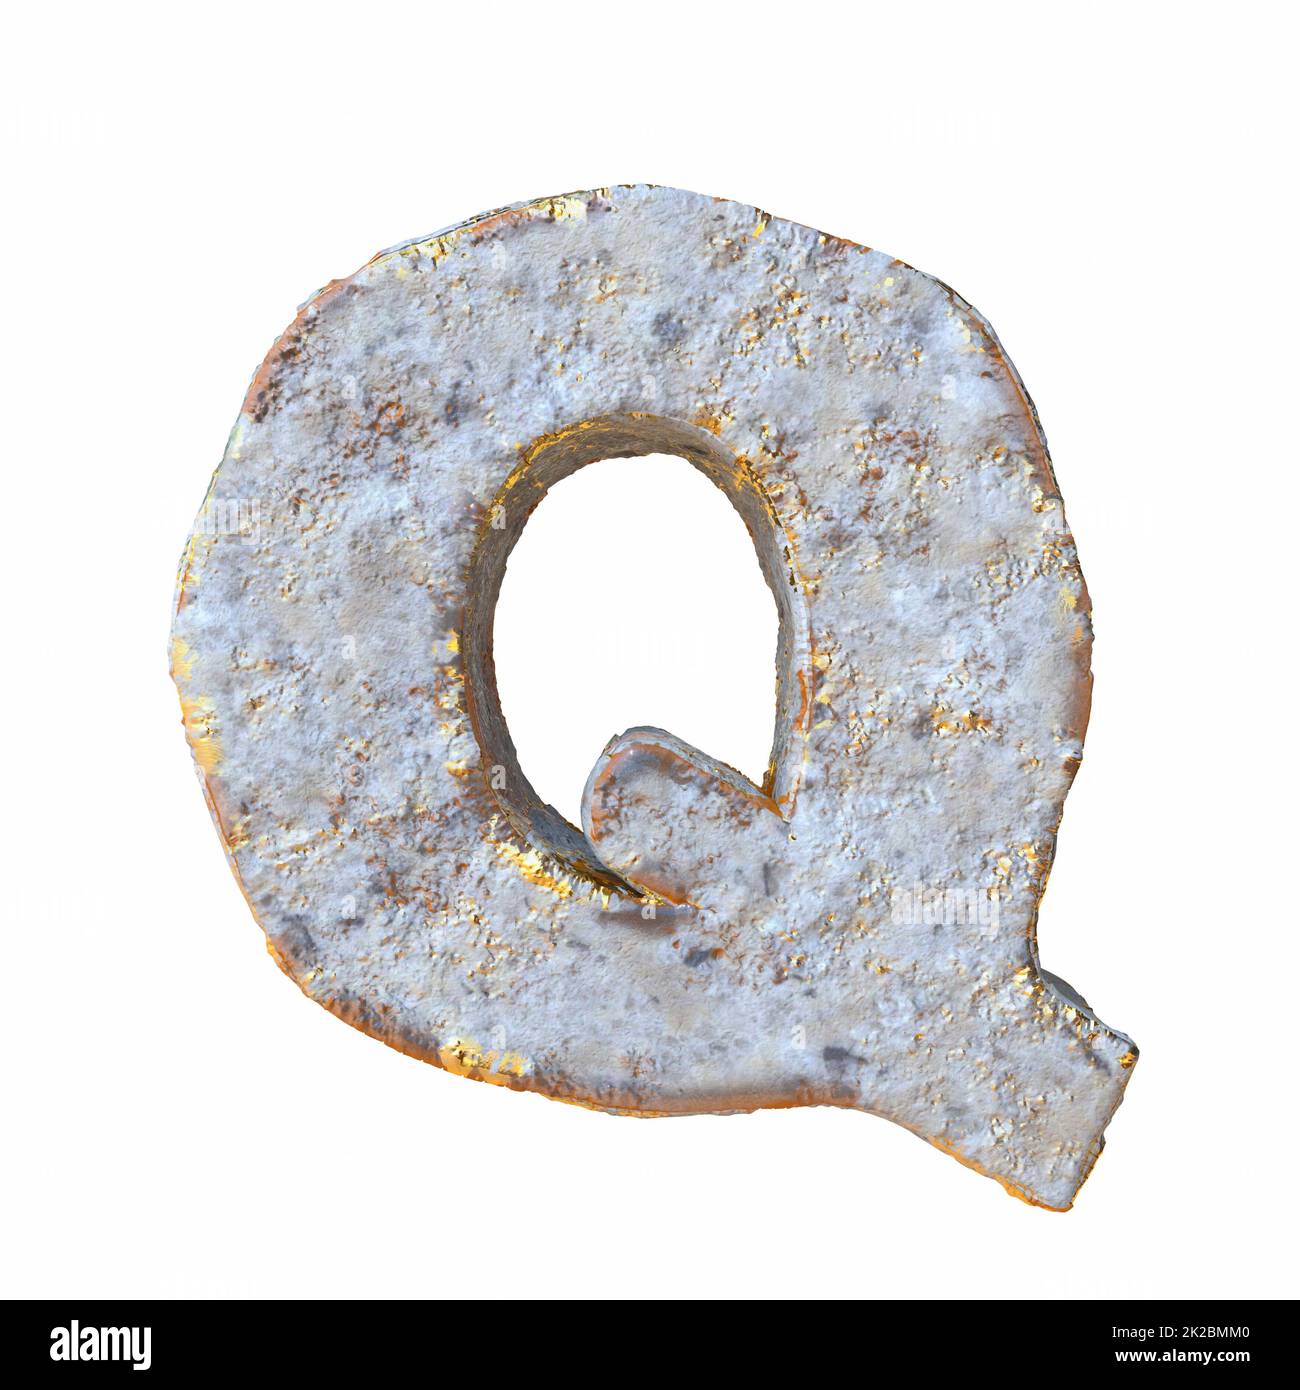 Stone with golden metal particles Letter Q 3D Stock Photo